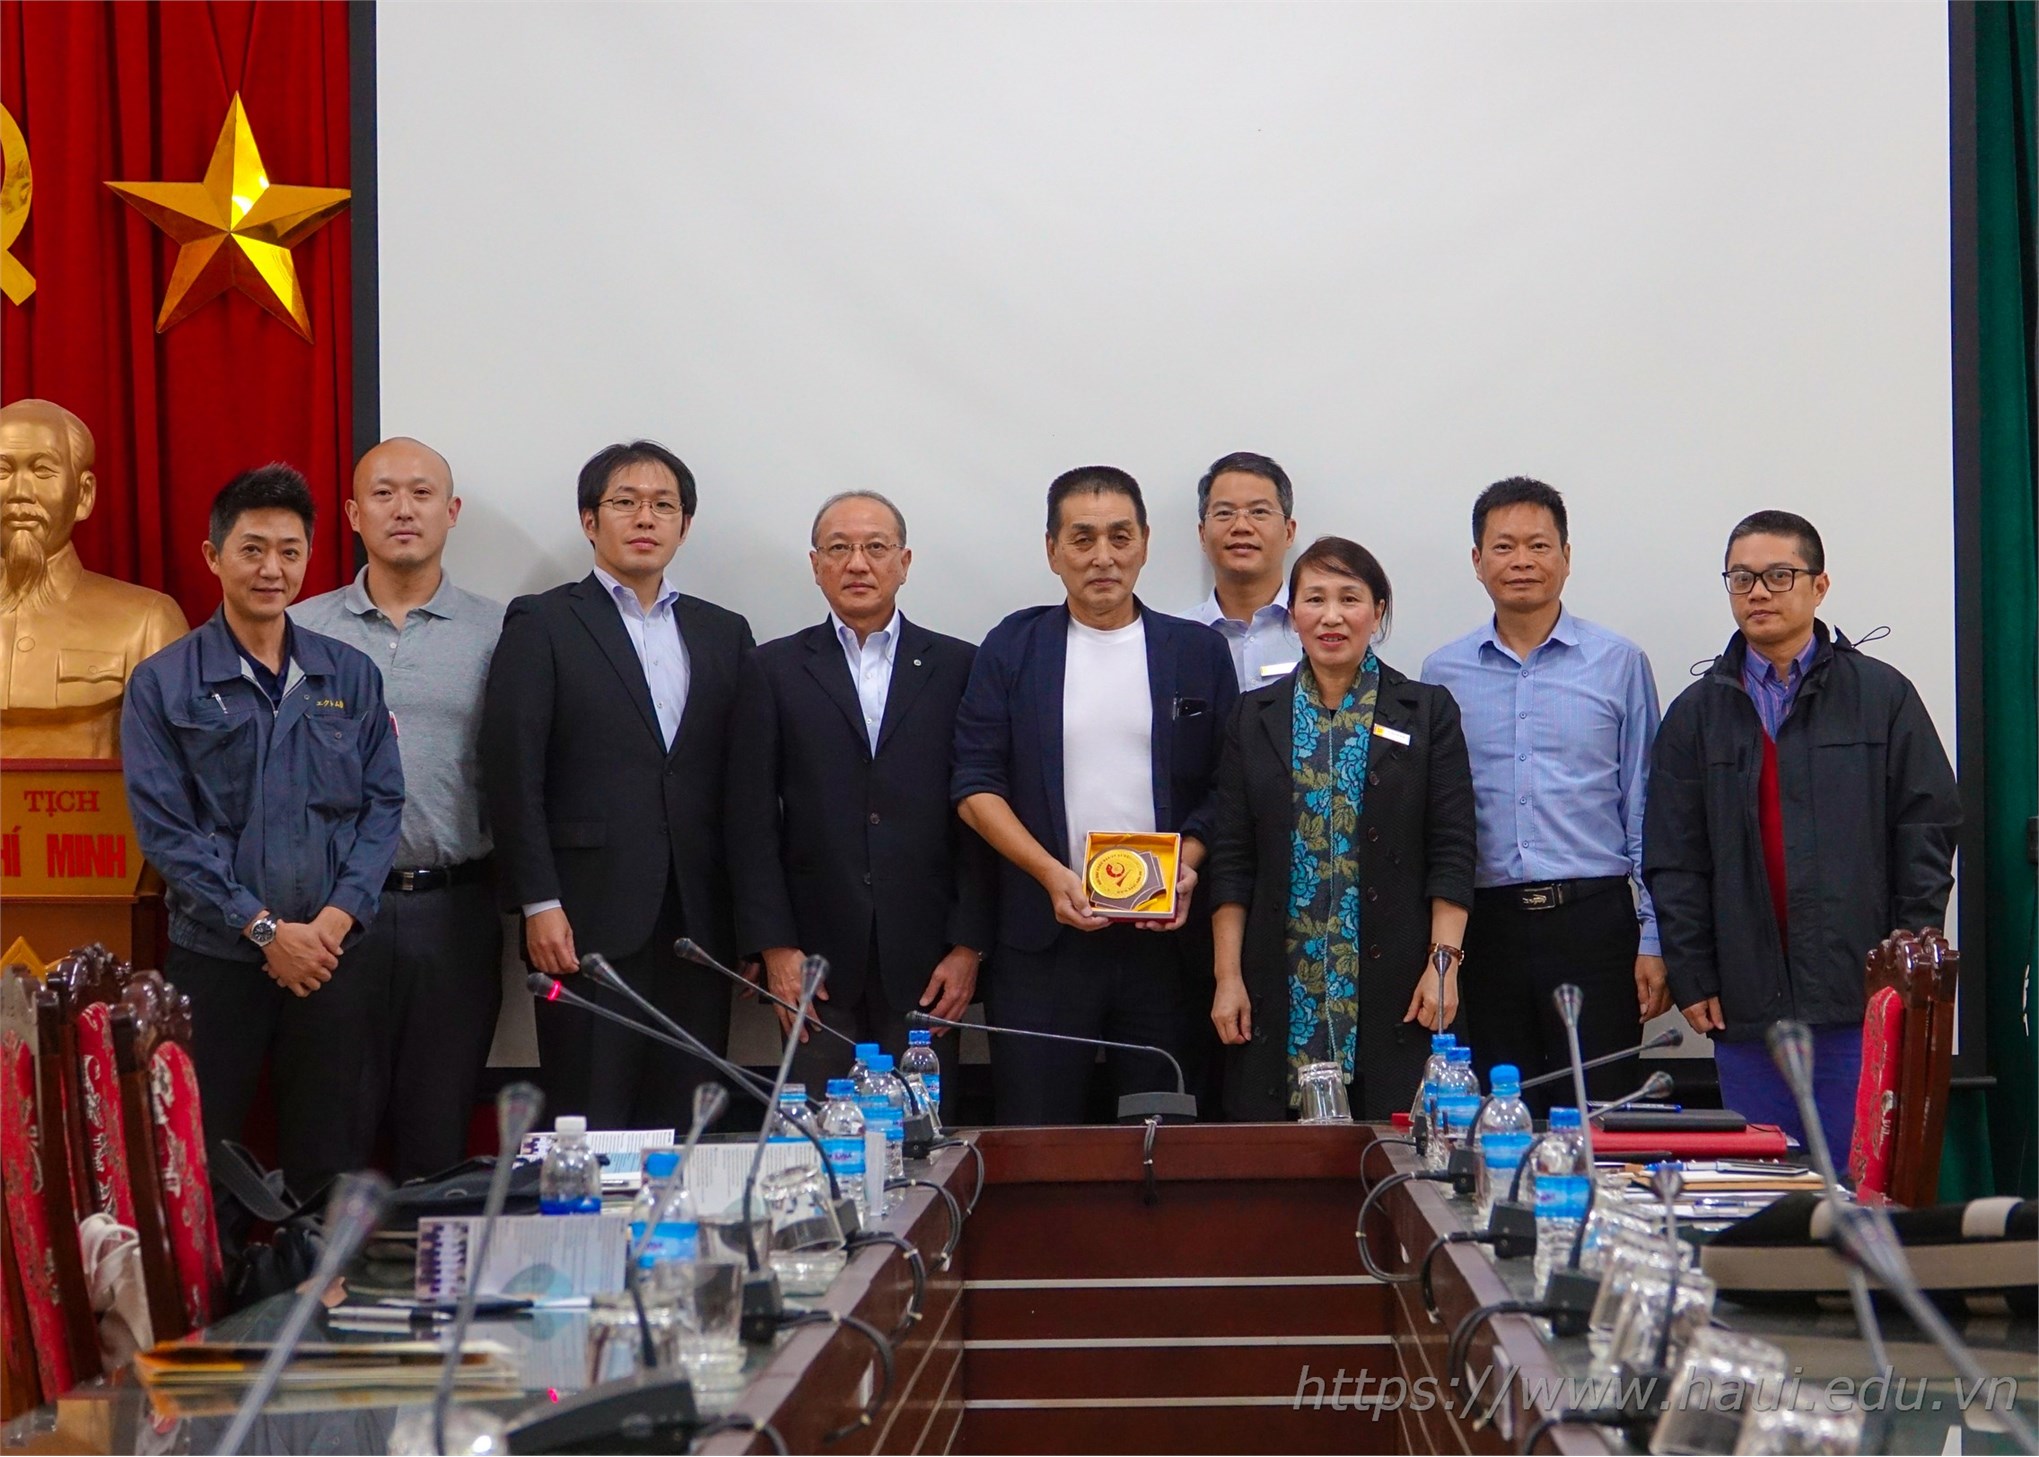 Hanoi University of Industry welcomes a delegation from Aomori prefectural government, Japan